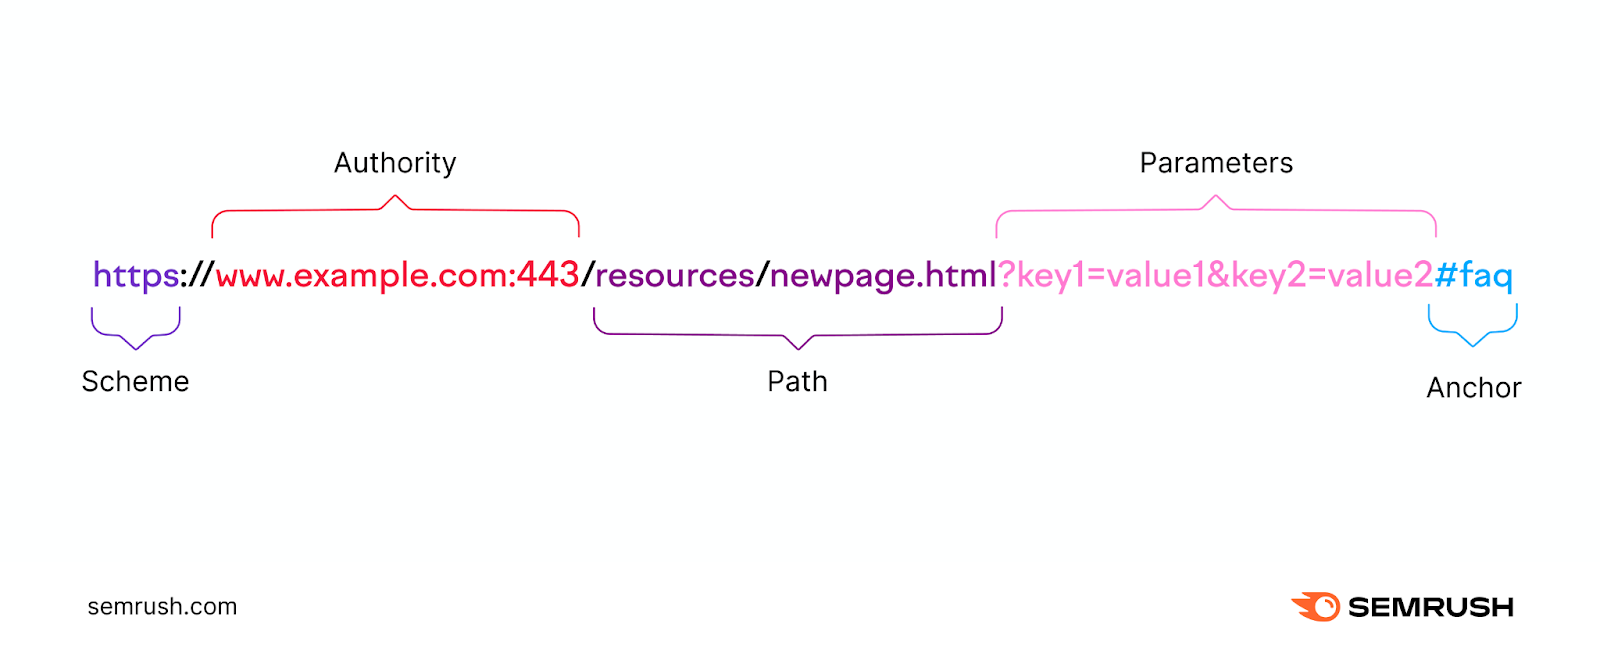 An example URL with marked parts that read "scheme," "authority," "path," "parameters," and "anchor"